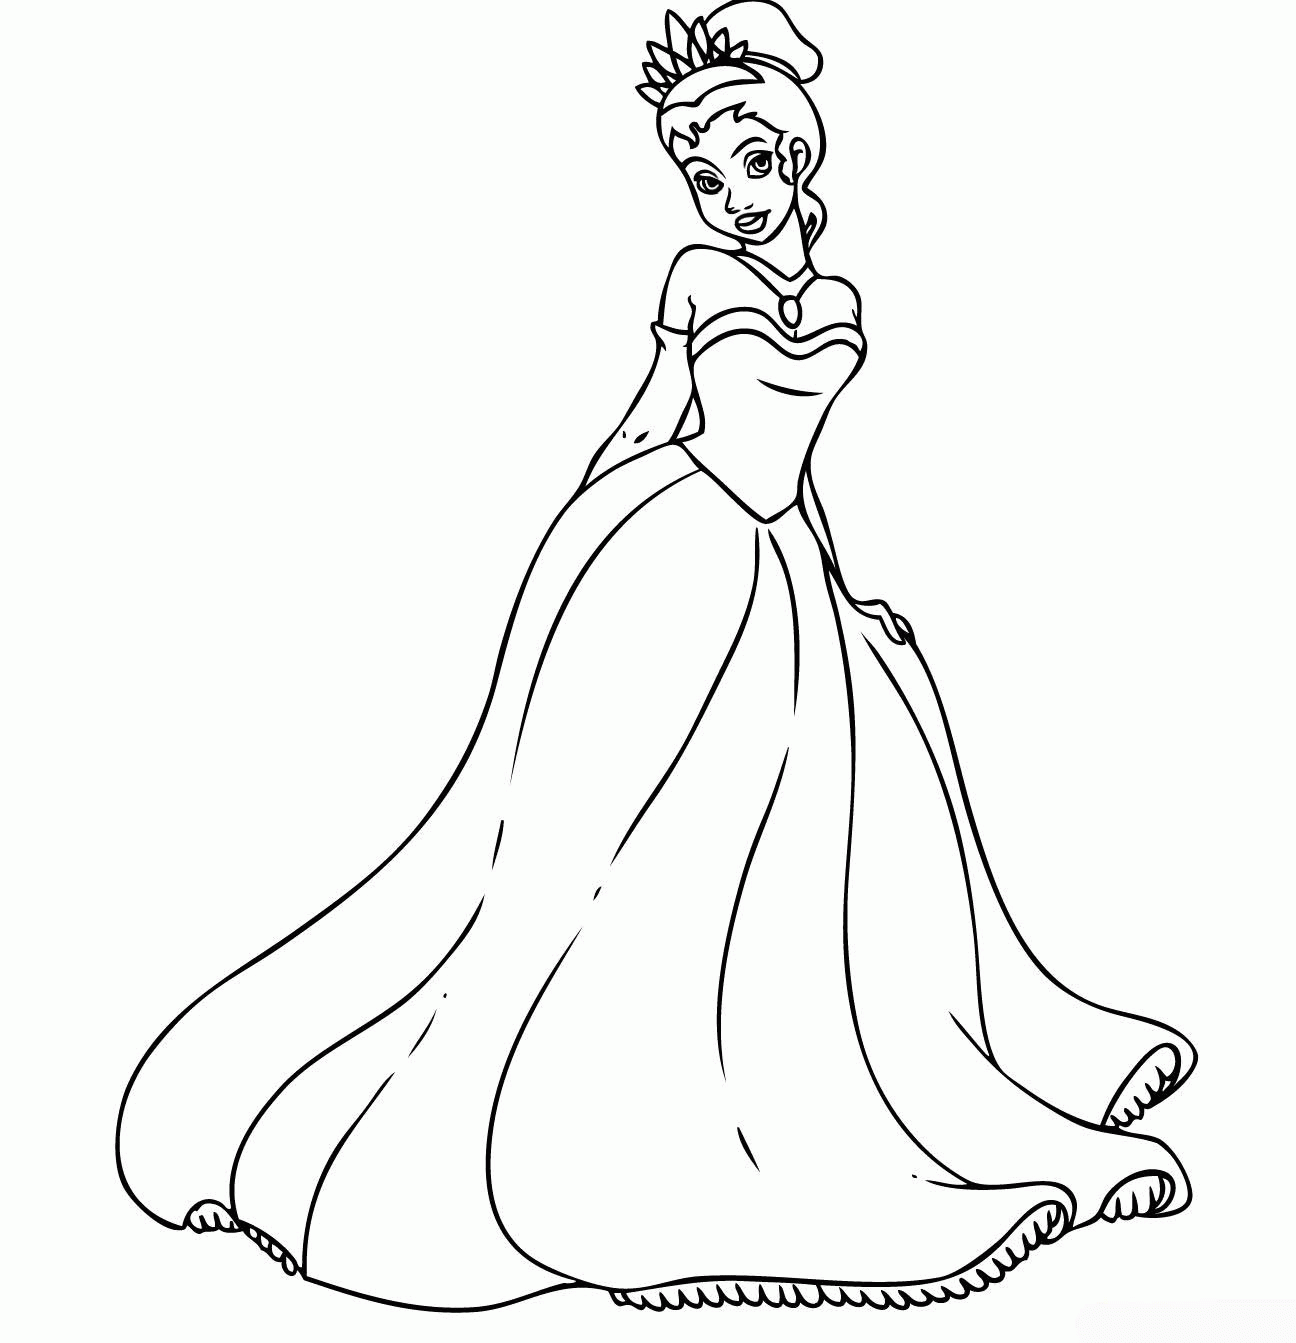 Disney Princess Coloring Pages   20 Free Printable Coloring Pages ...